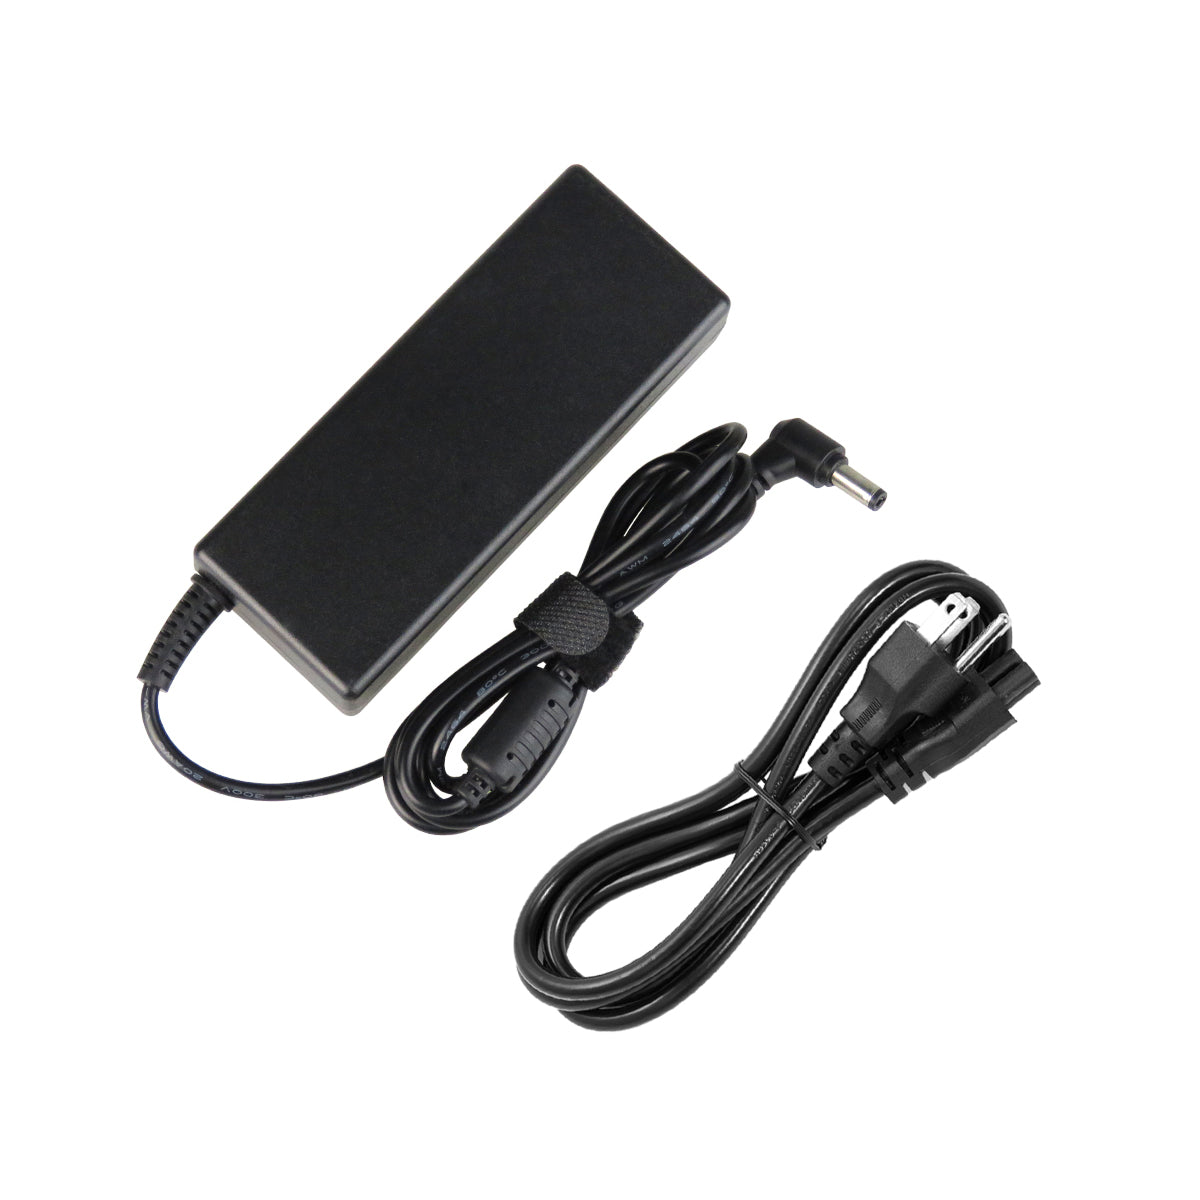 AC Adapter Charger for ASUS X71 Notebook.